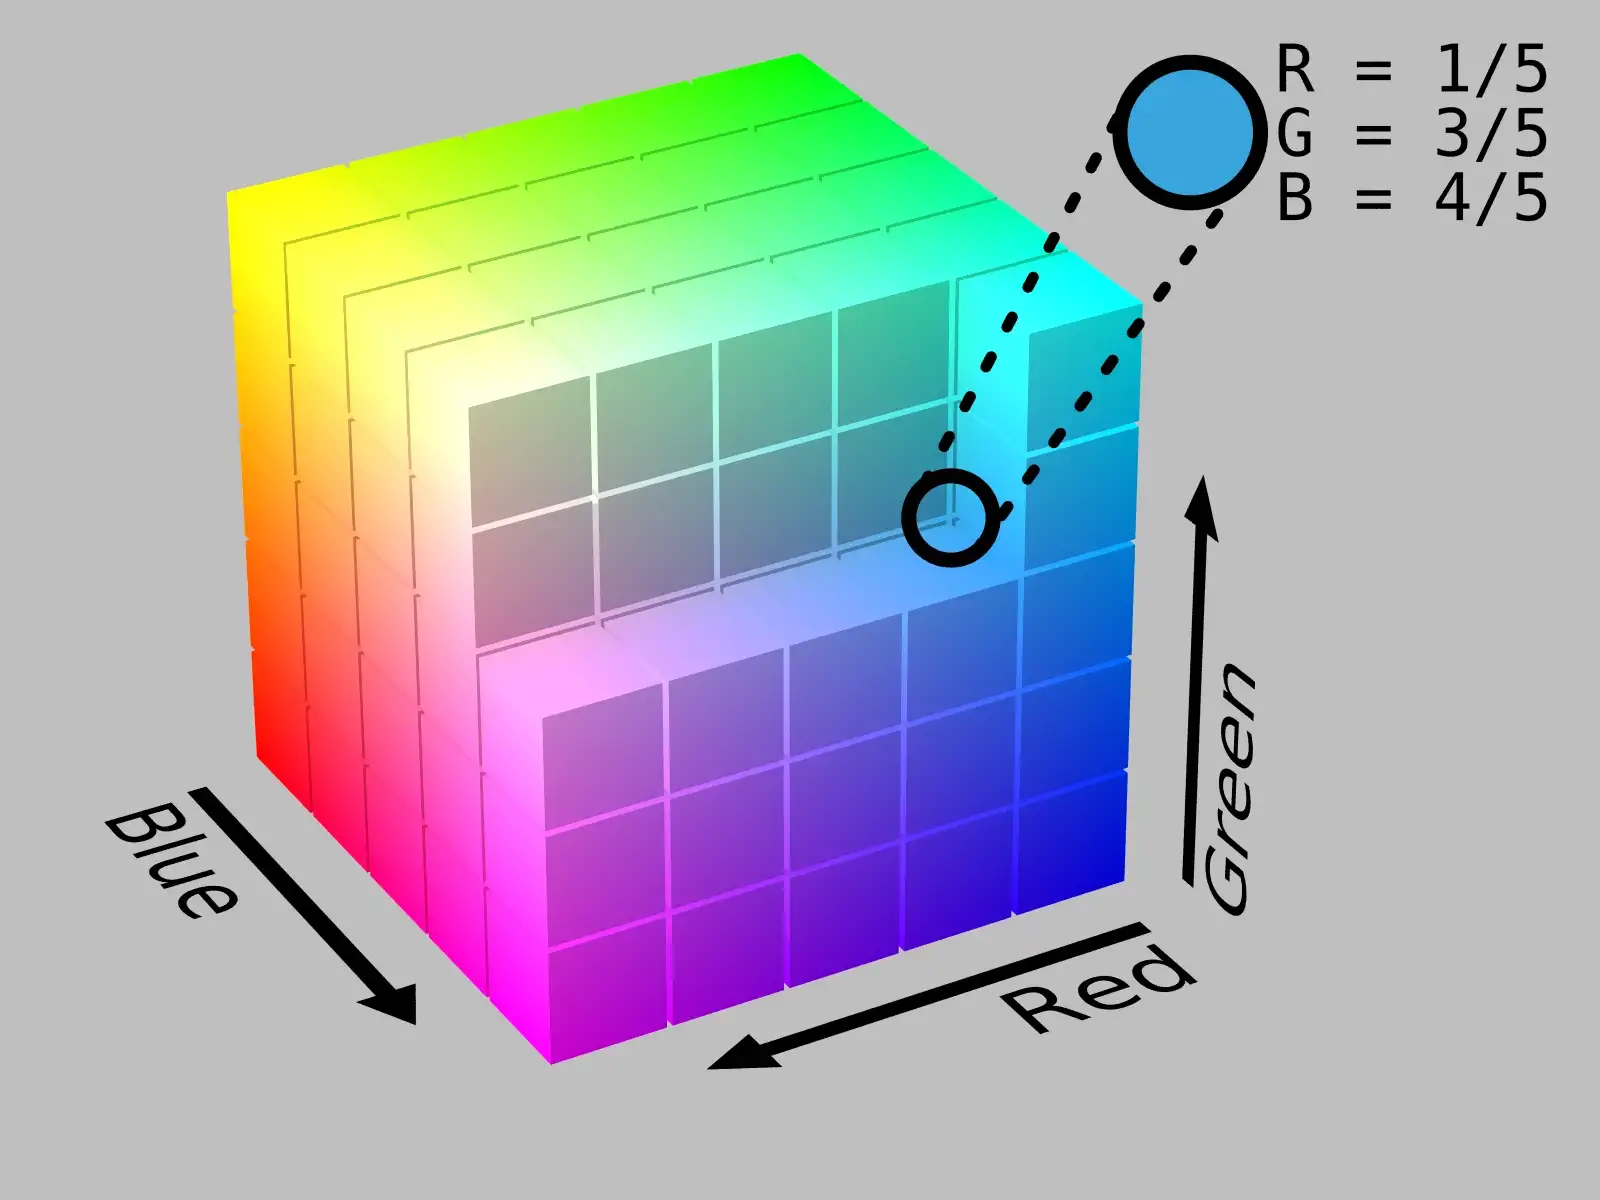 Image of RGB Color Space (https://en.wikipedia.org/wiki/File:RGB_Cube_Show_lowgamma_cutout_b.png)